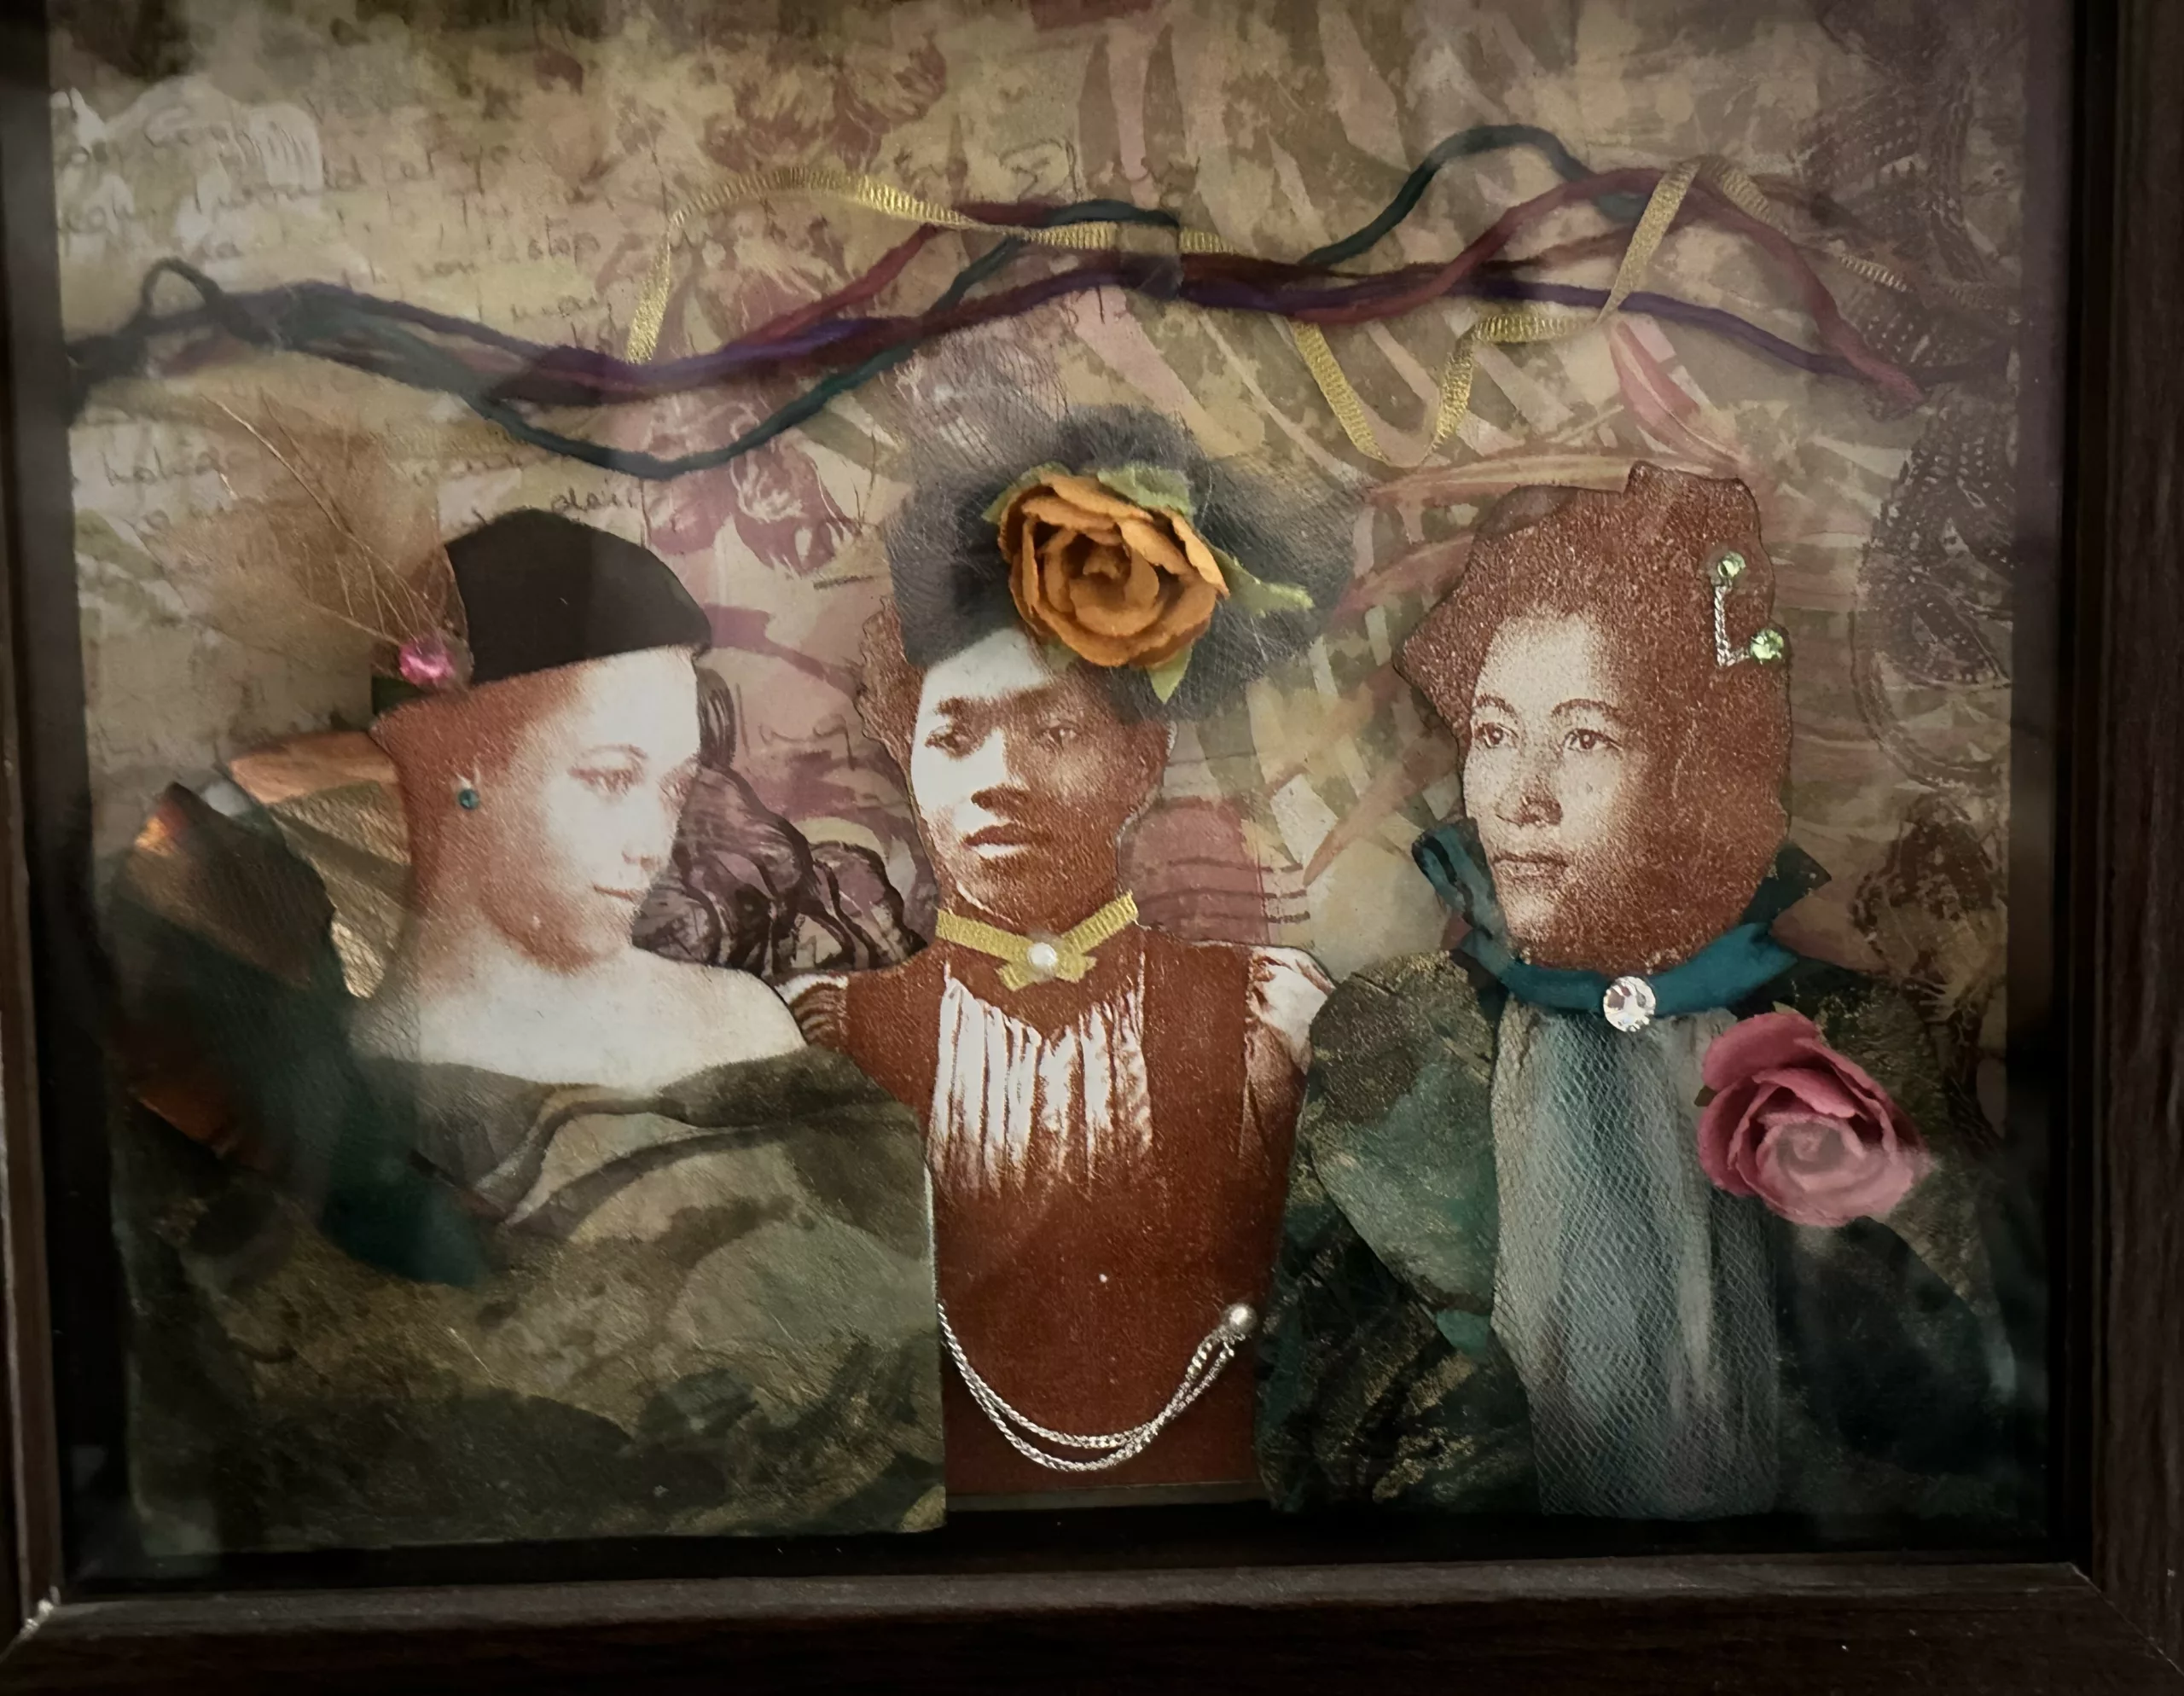 Shadow box with a leafy background in a tan color. Across the top vertically run ribbons. At the bottom are three busts of women dressed in fabric, lace, jewels, and flowers.